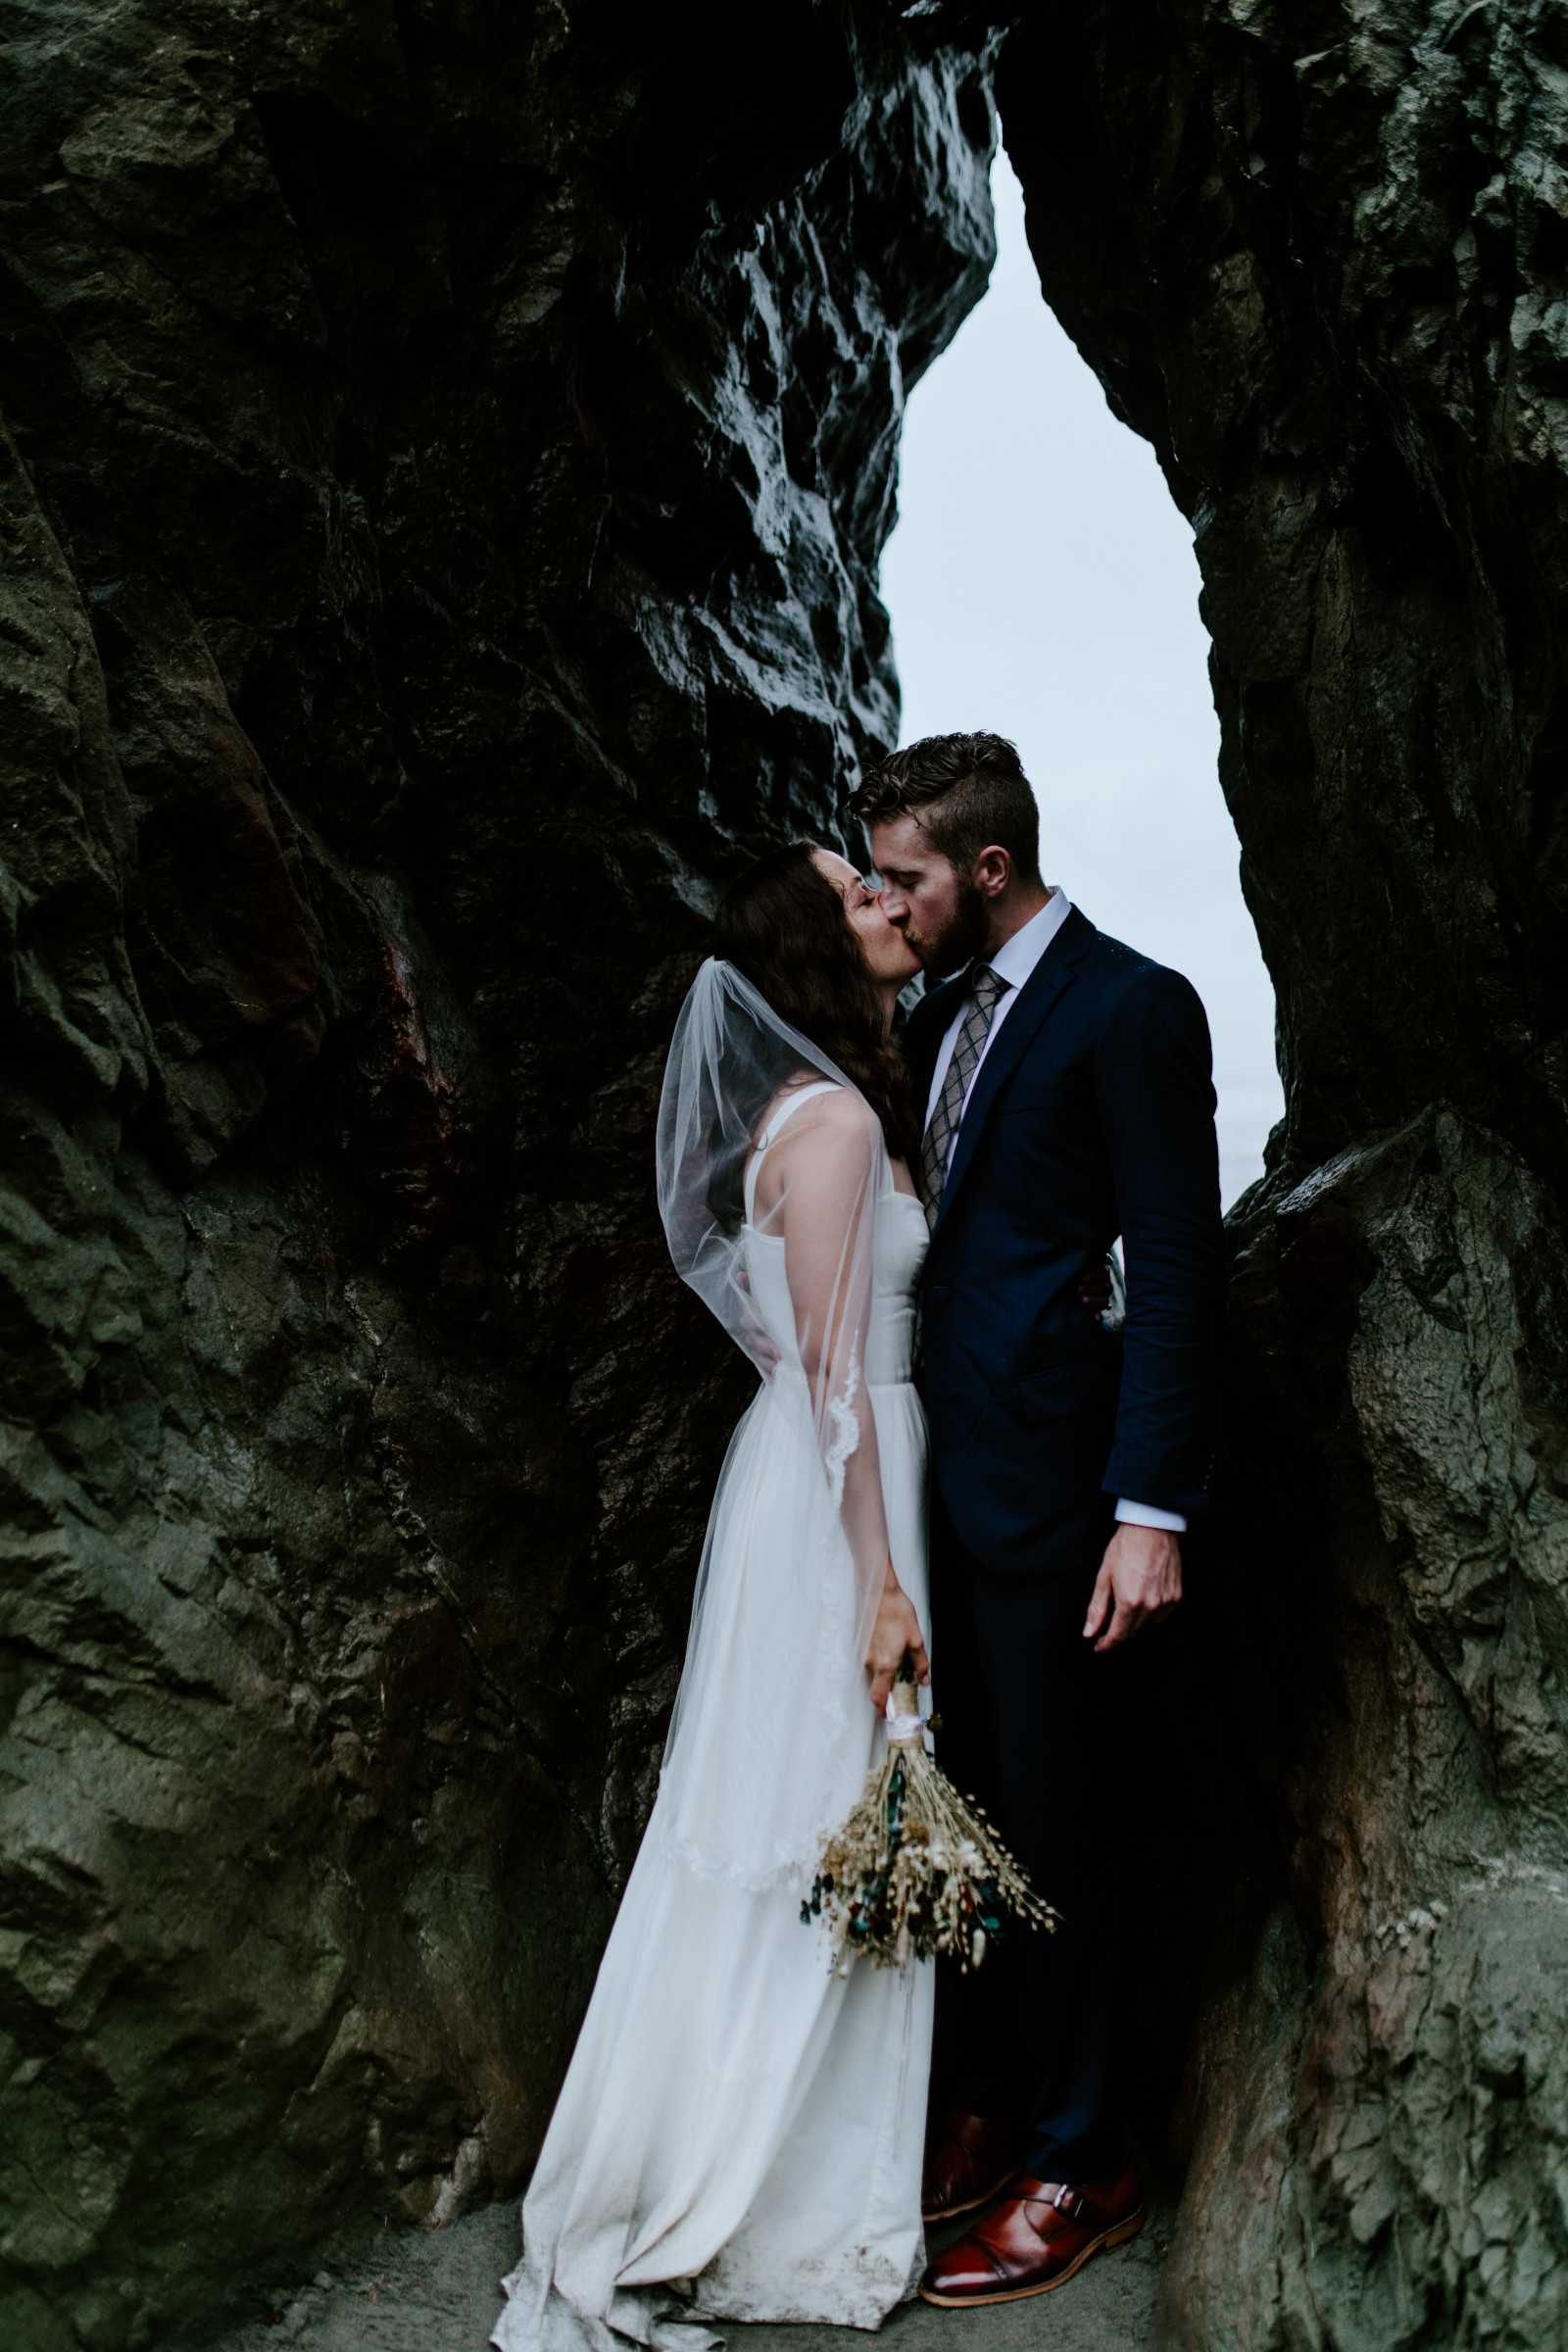 Corey and Mollie kiss in front of a large rock. Elopement photography at Olympic National Park by Sienna Plus Josh.